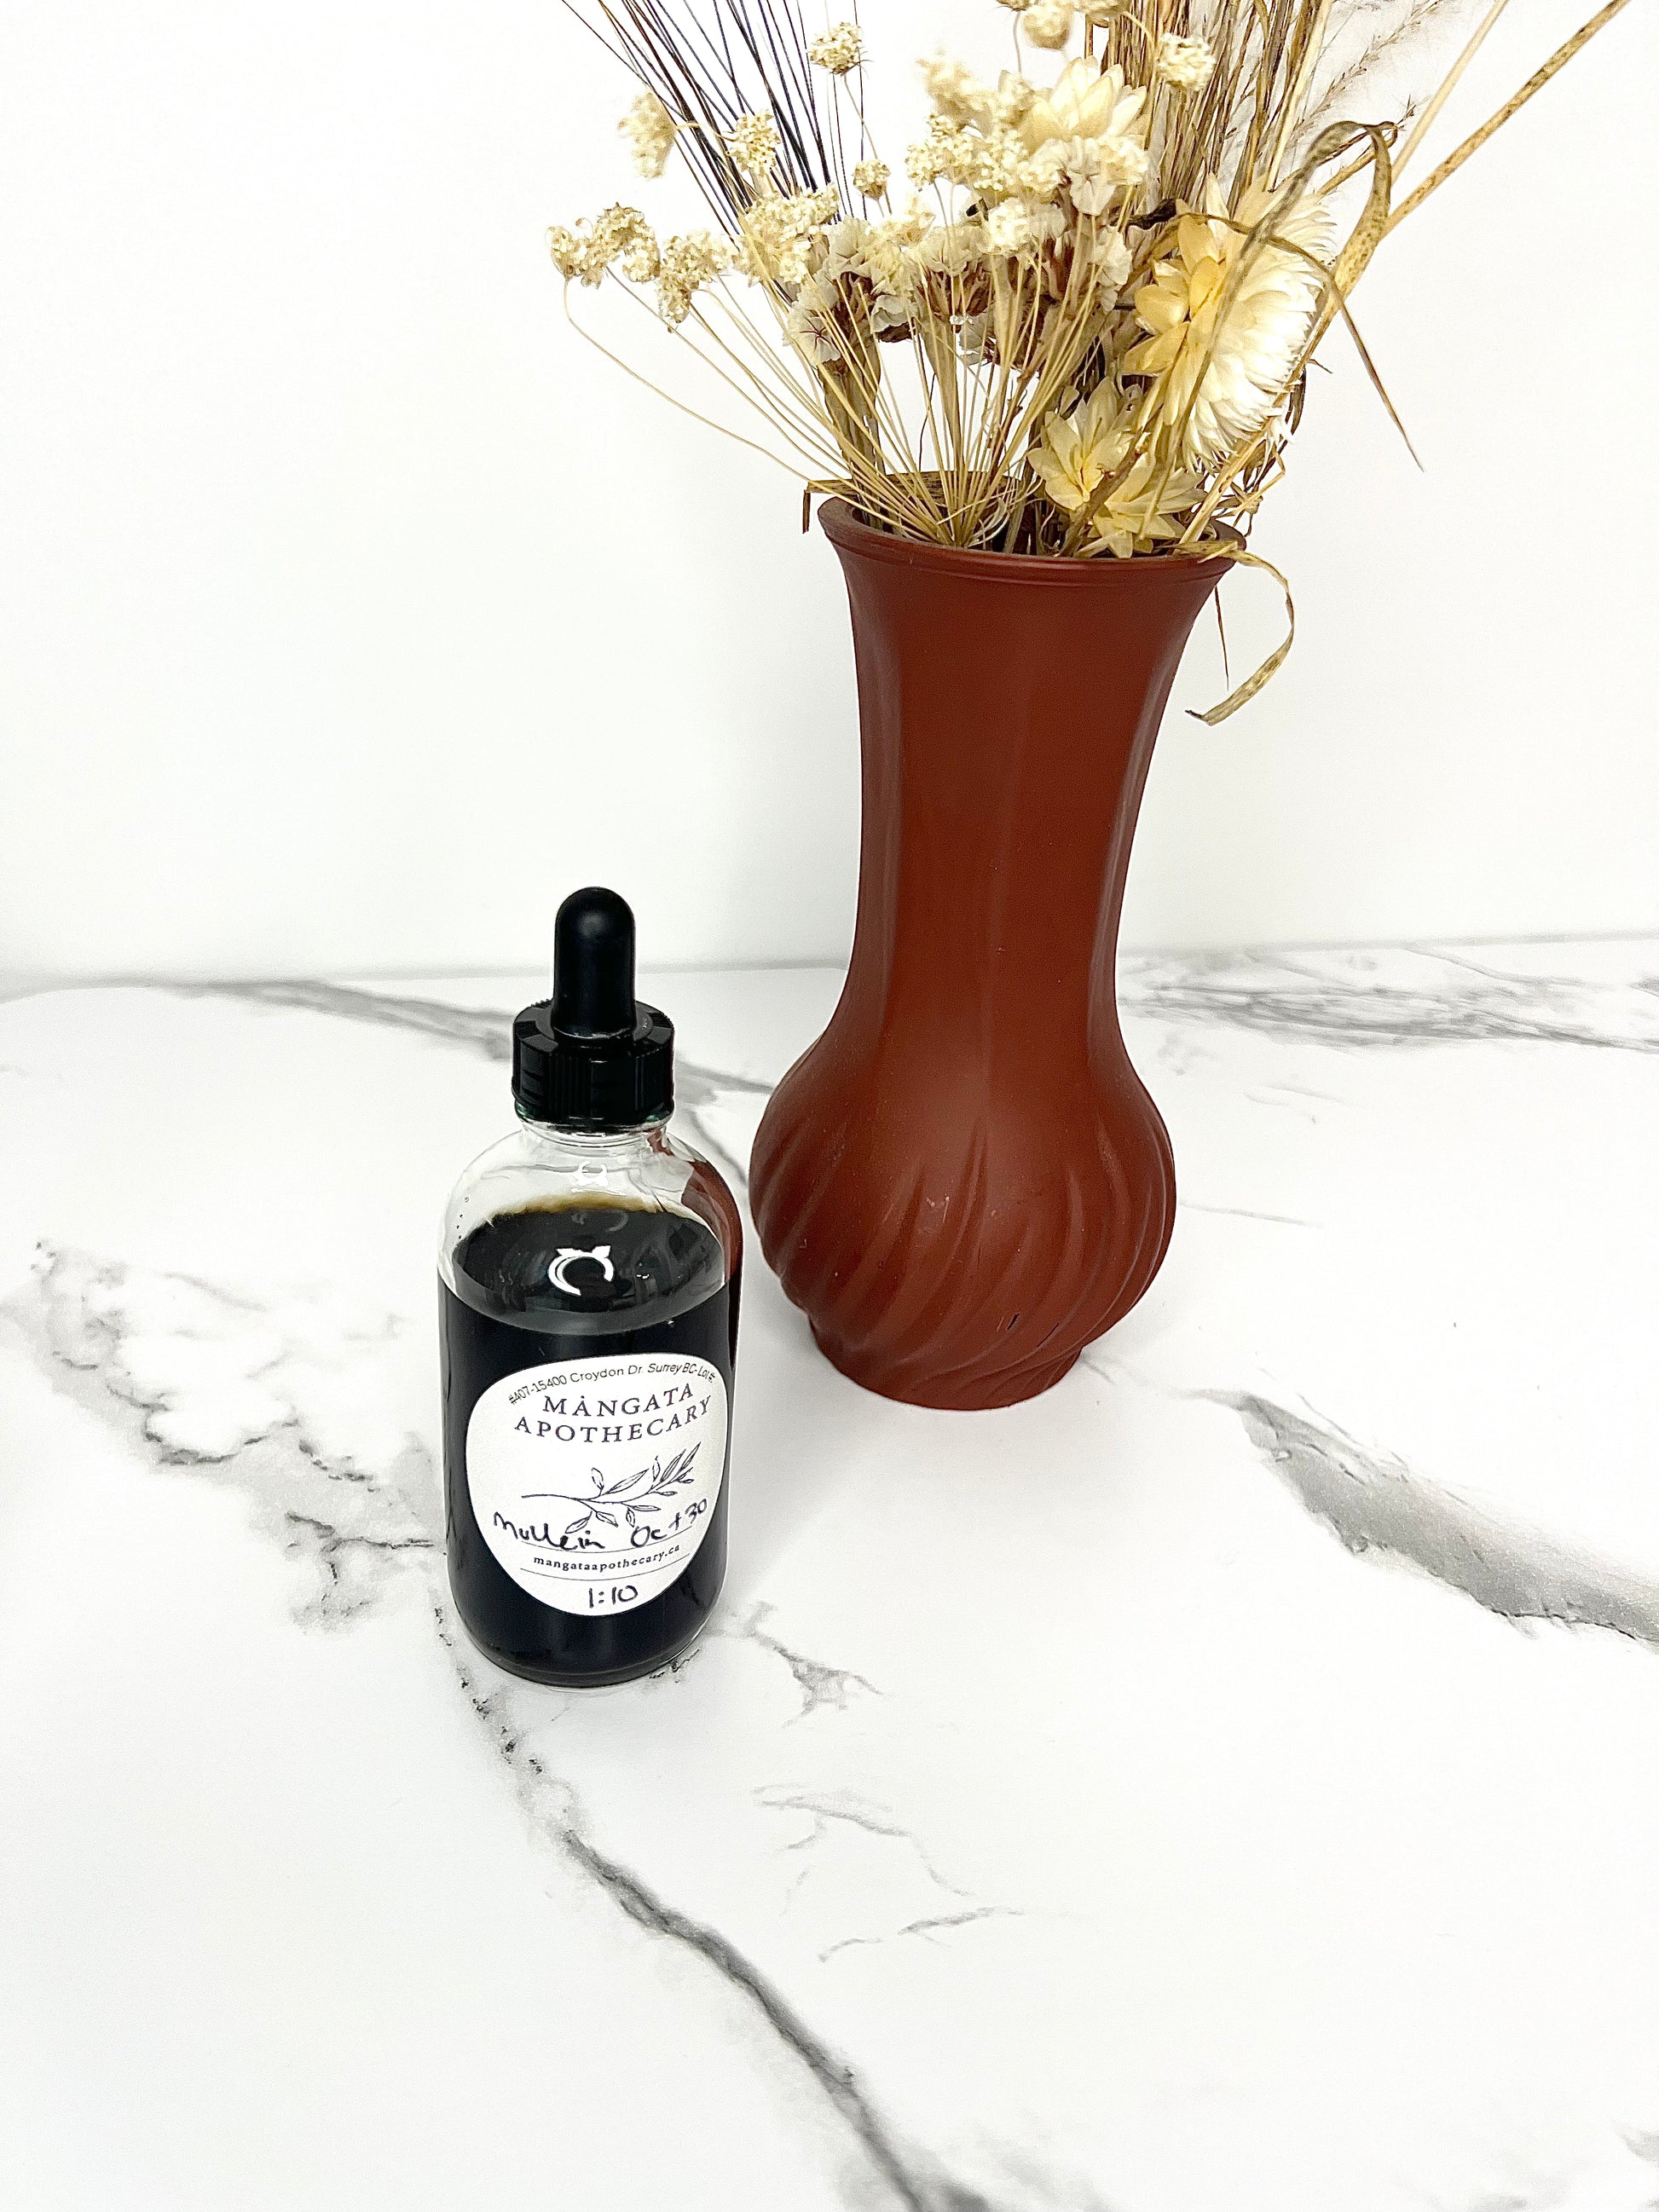 Mullein Tincture - Product Image For Mangata Dispensary